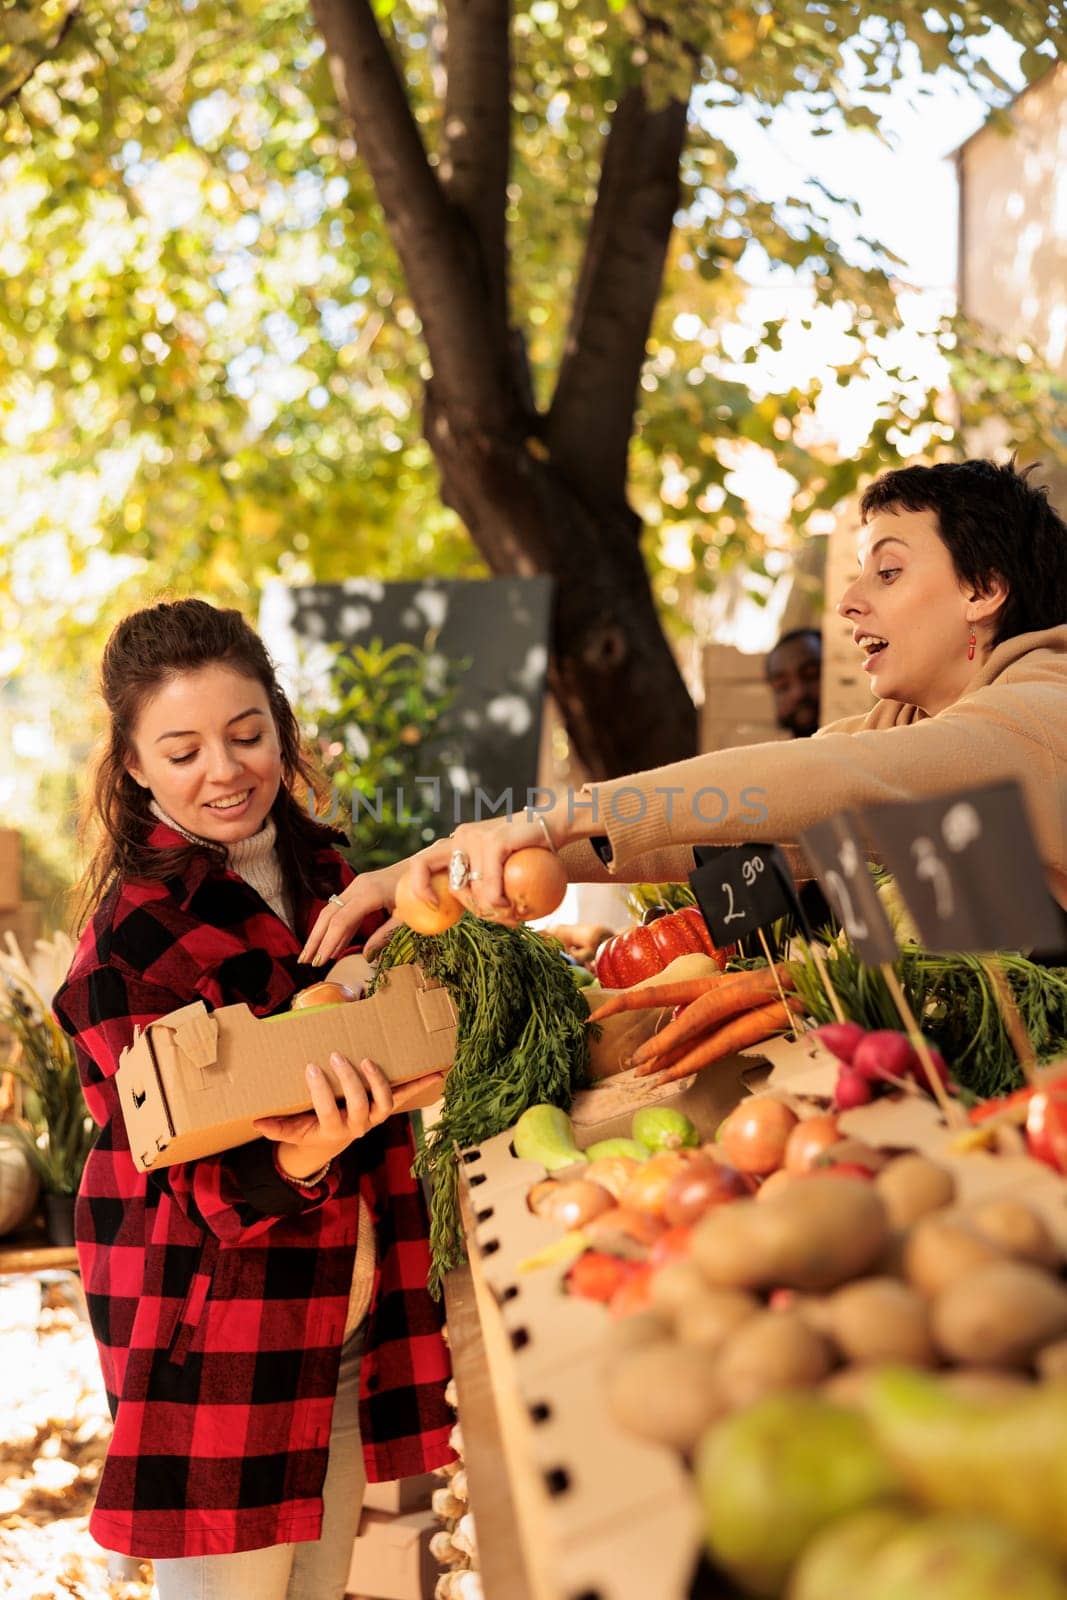 Young happy millennial woman buying fresh organic vegetables at local farmers market, smiling female customer holding box full of seasonal veggies while standing near stall with various farm products